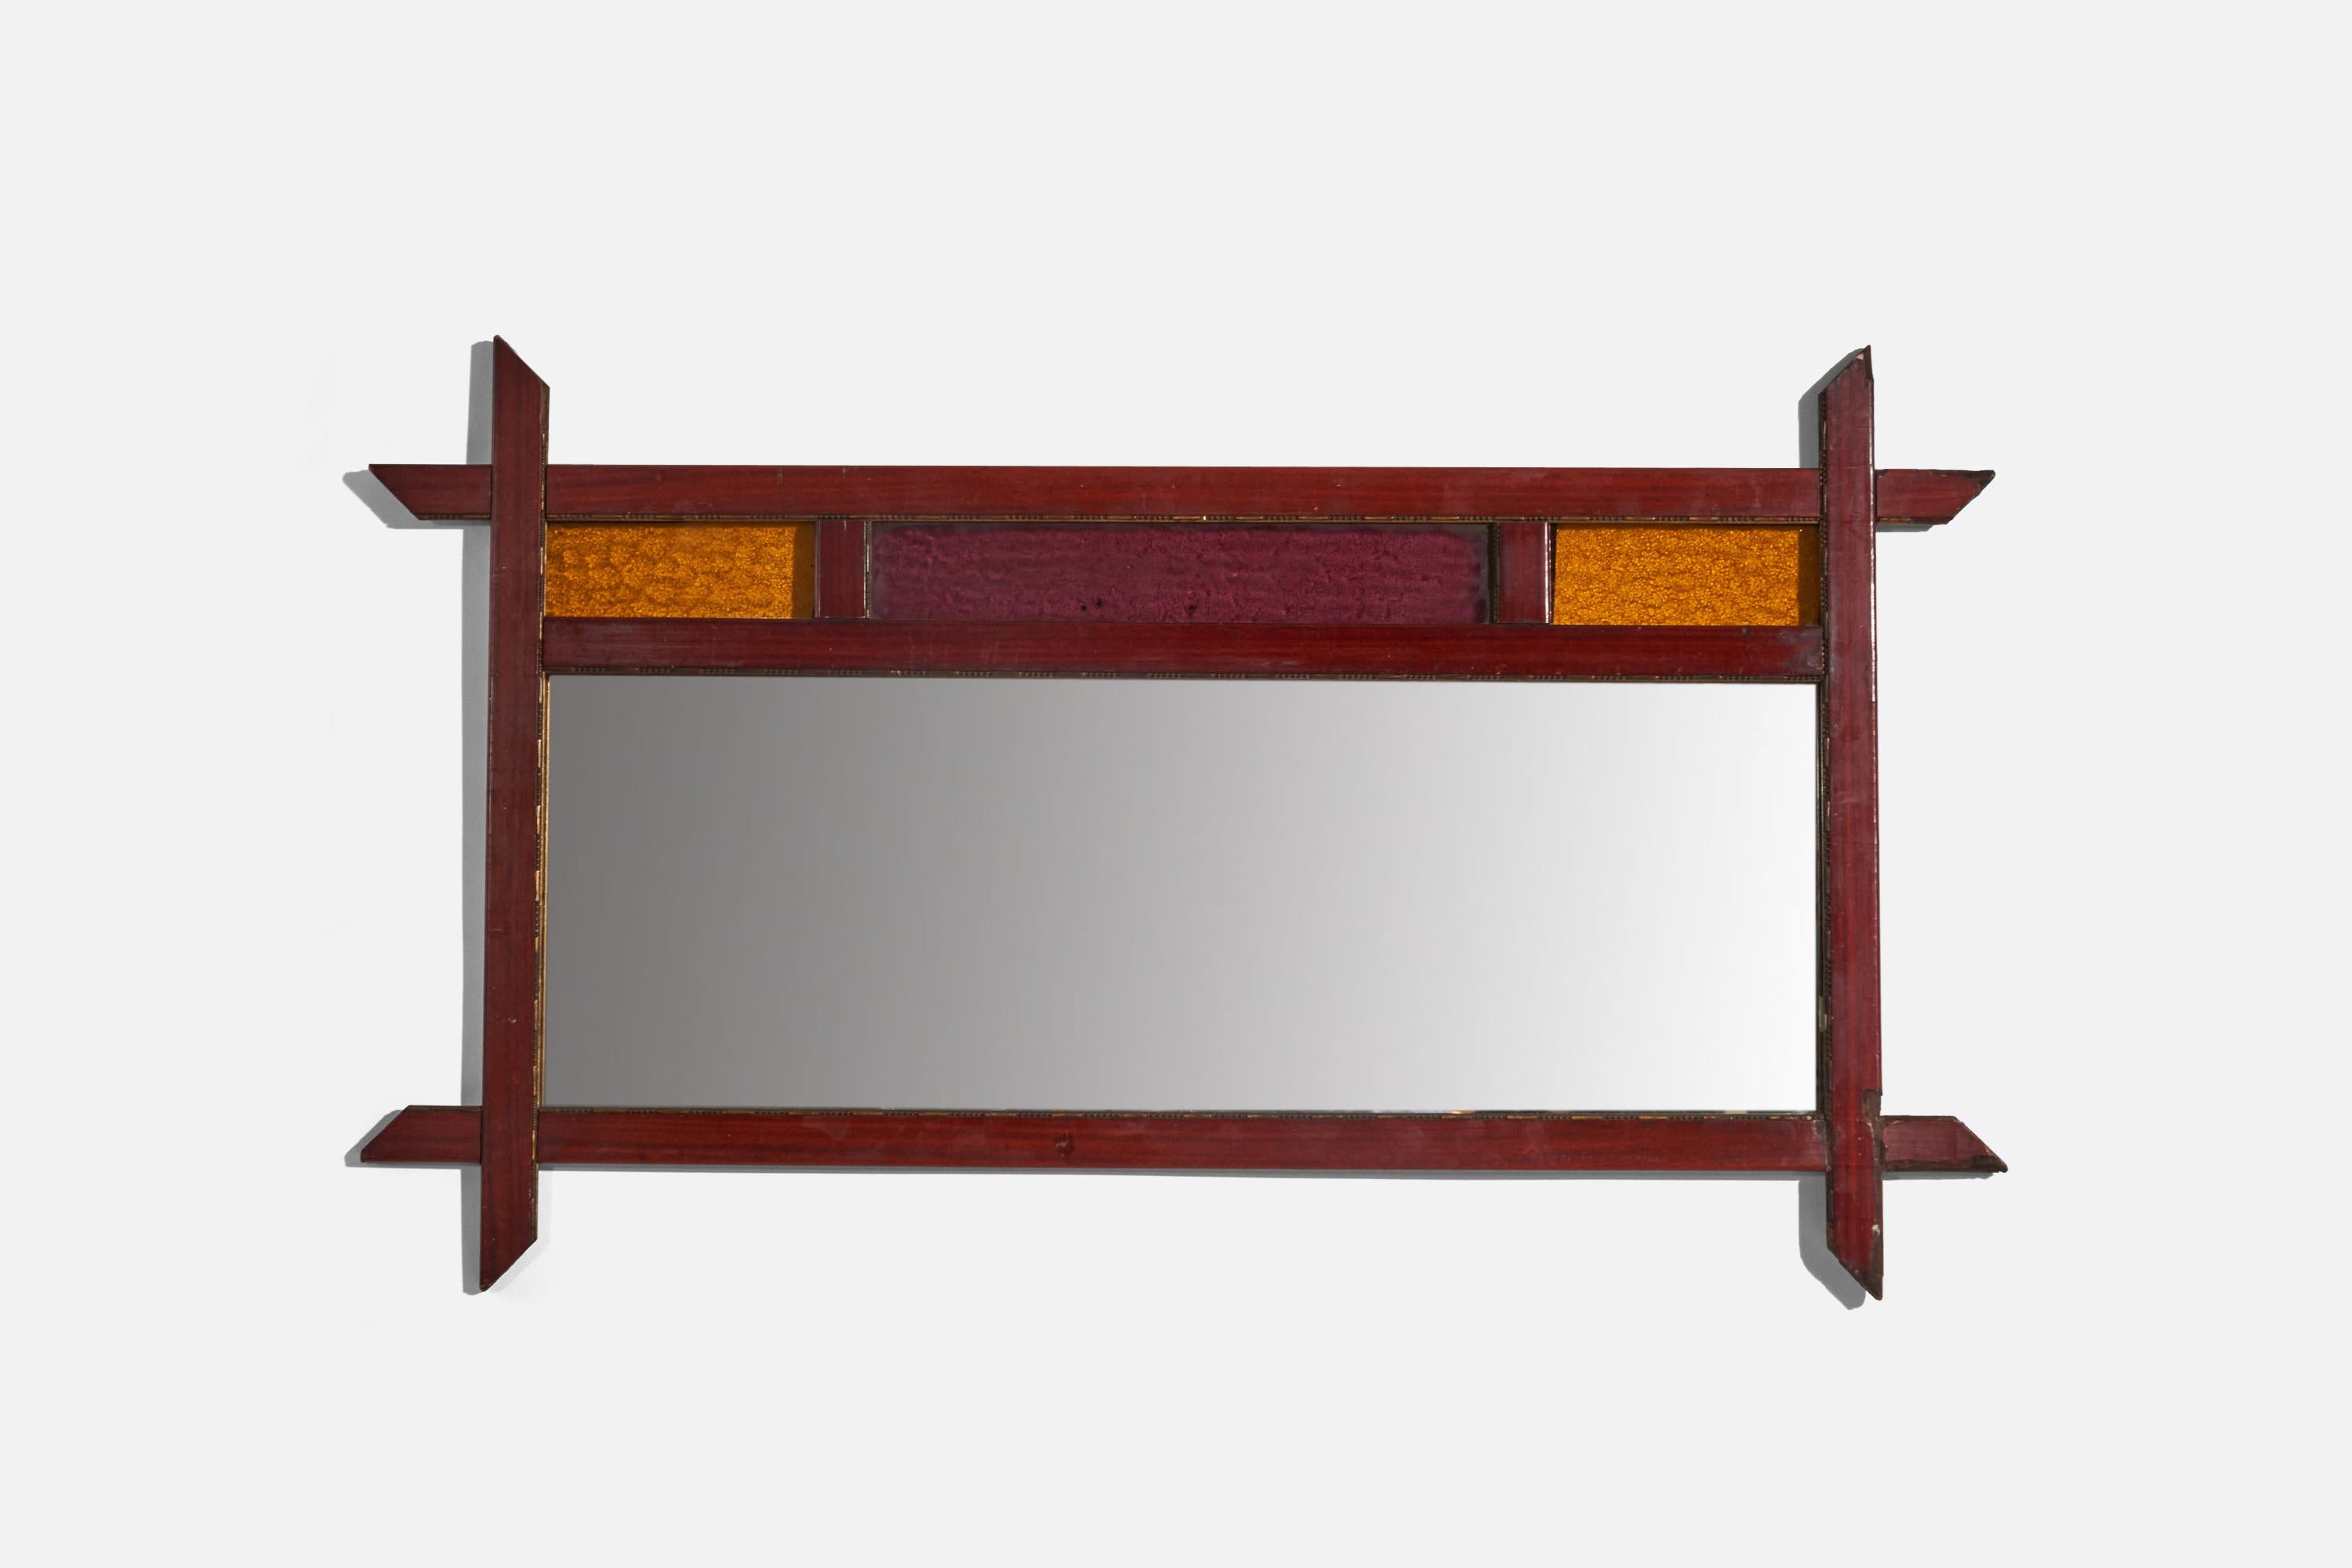 A wood and glass wall mirror designed and produced by an Italian designer, Italy, c. 1960s.
 